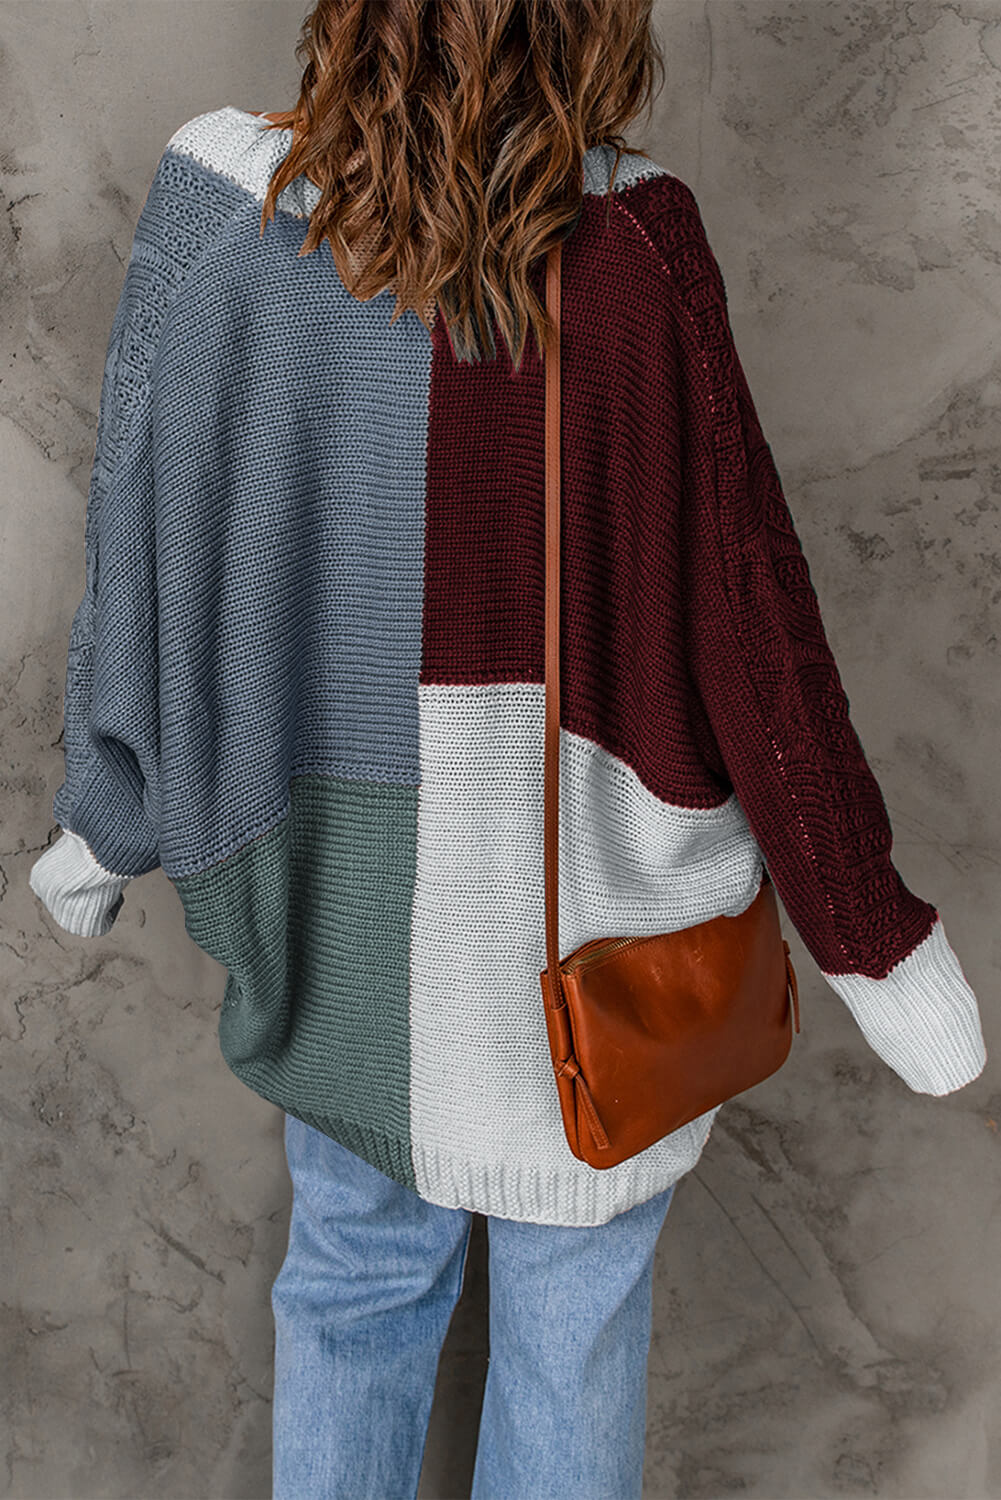 Woven Right Color Block Cable-Knit Batwing Sleeve Cardigan - TiffanyzKlozet